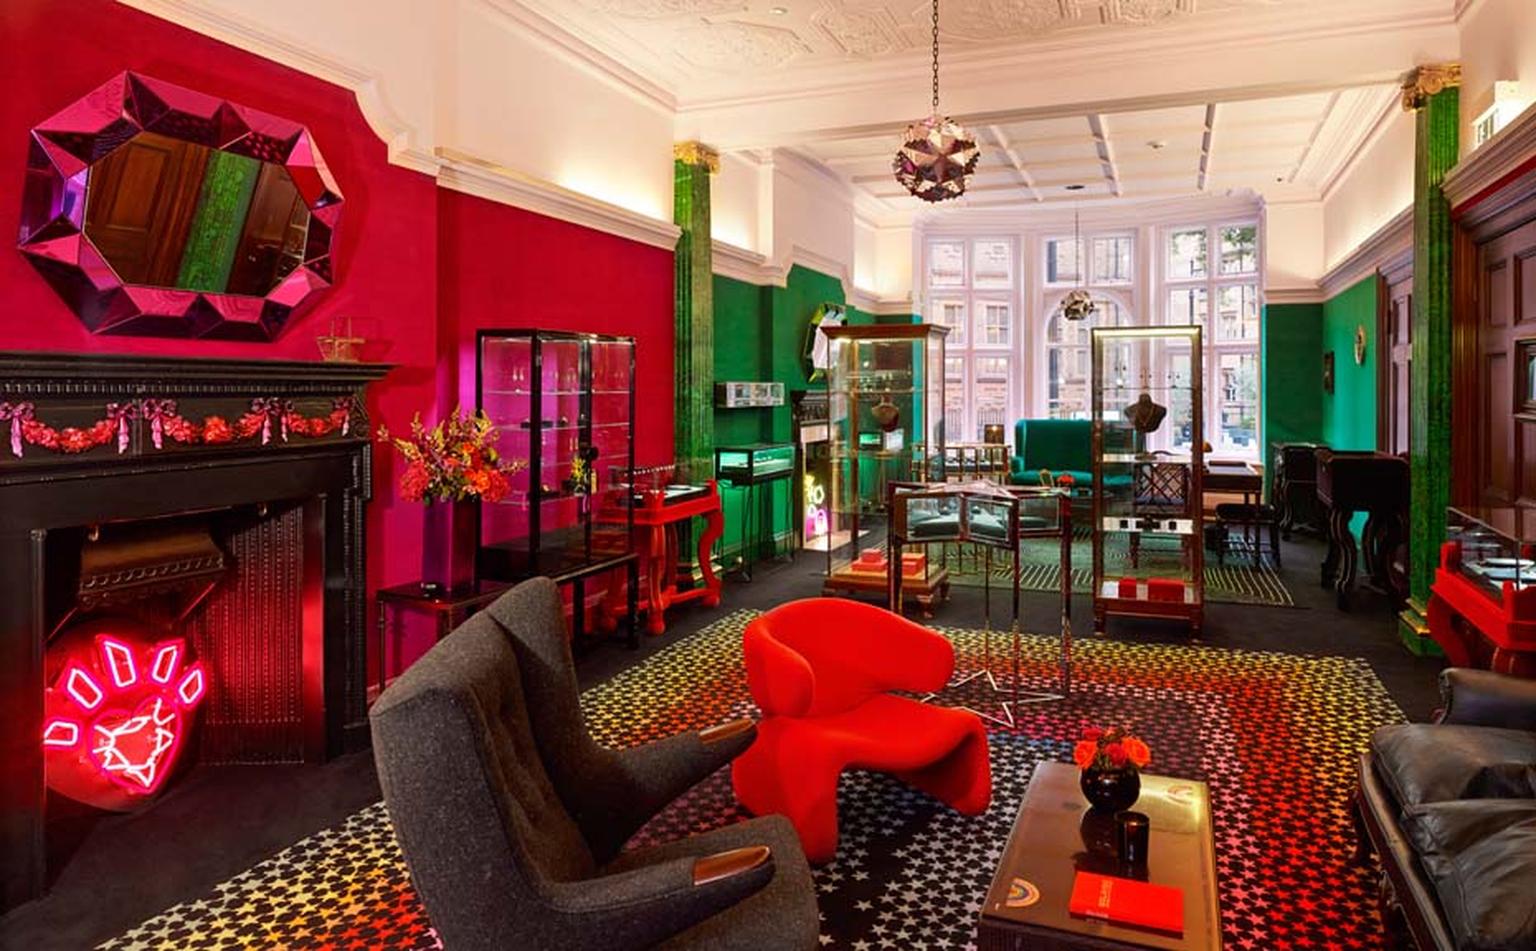 Opened in 2013, Solange Azagury-Partridge's luxurious townhouse on Mount Street in Mayfair, London, is as colourfully eclectic as her designs.